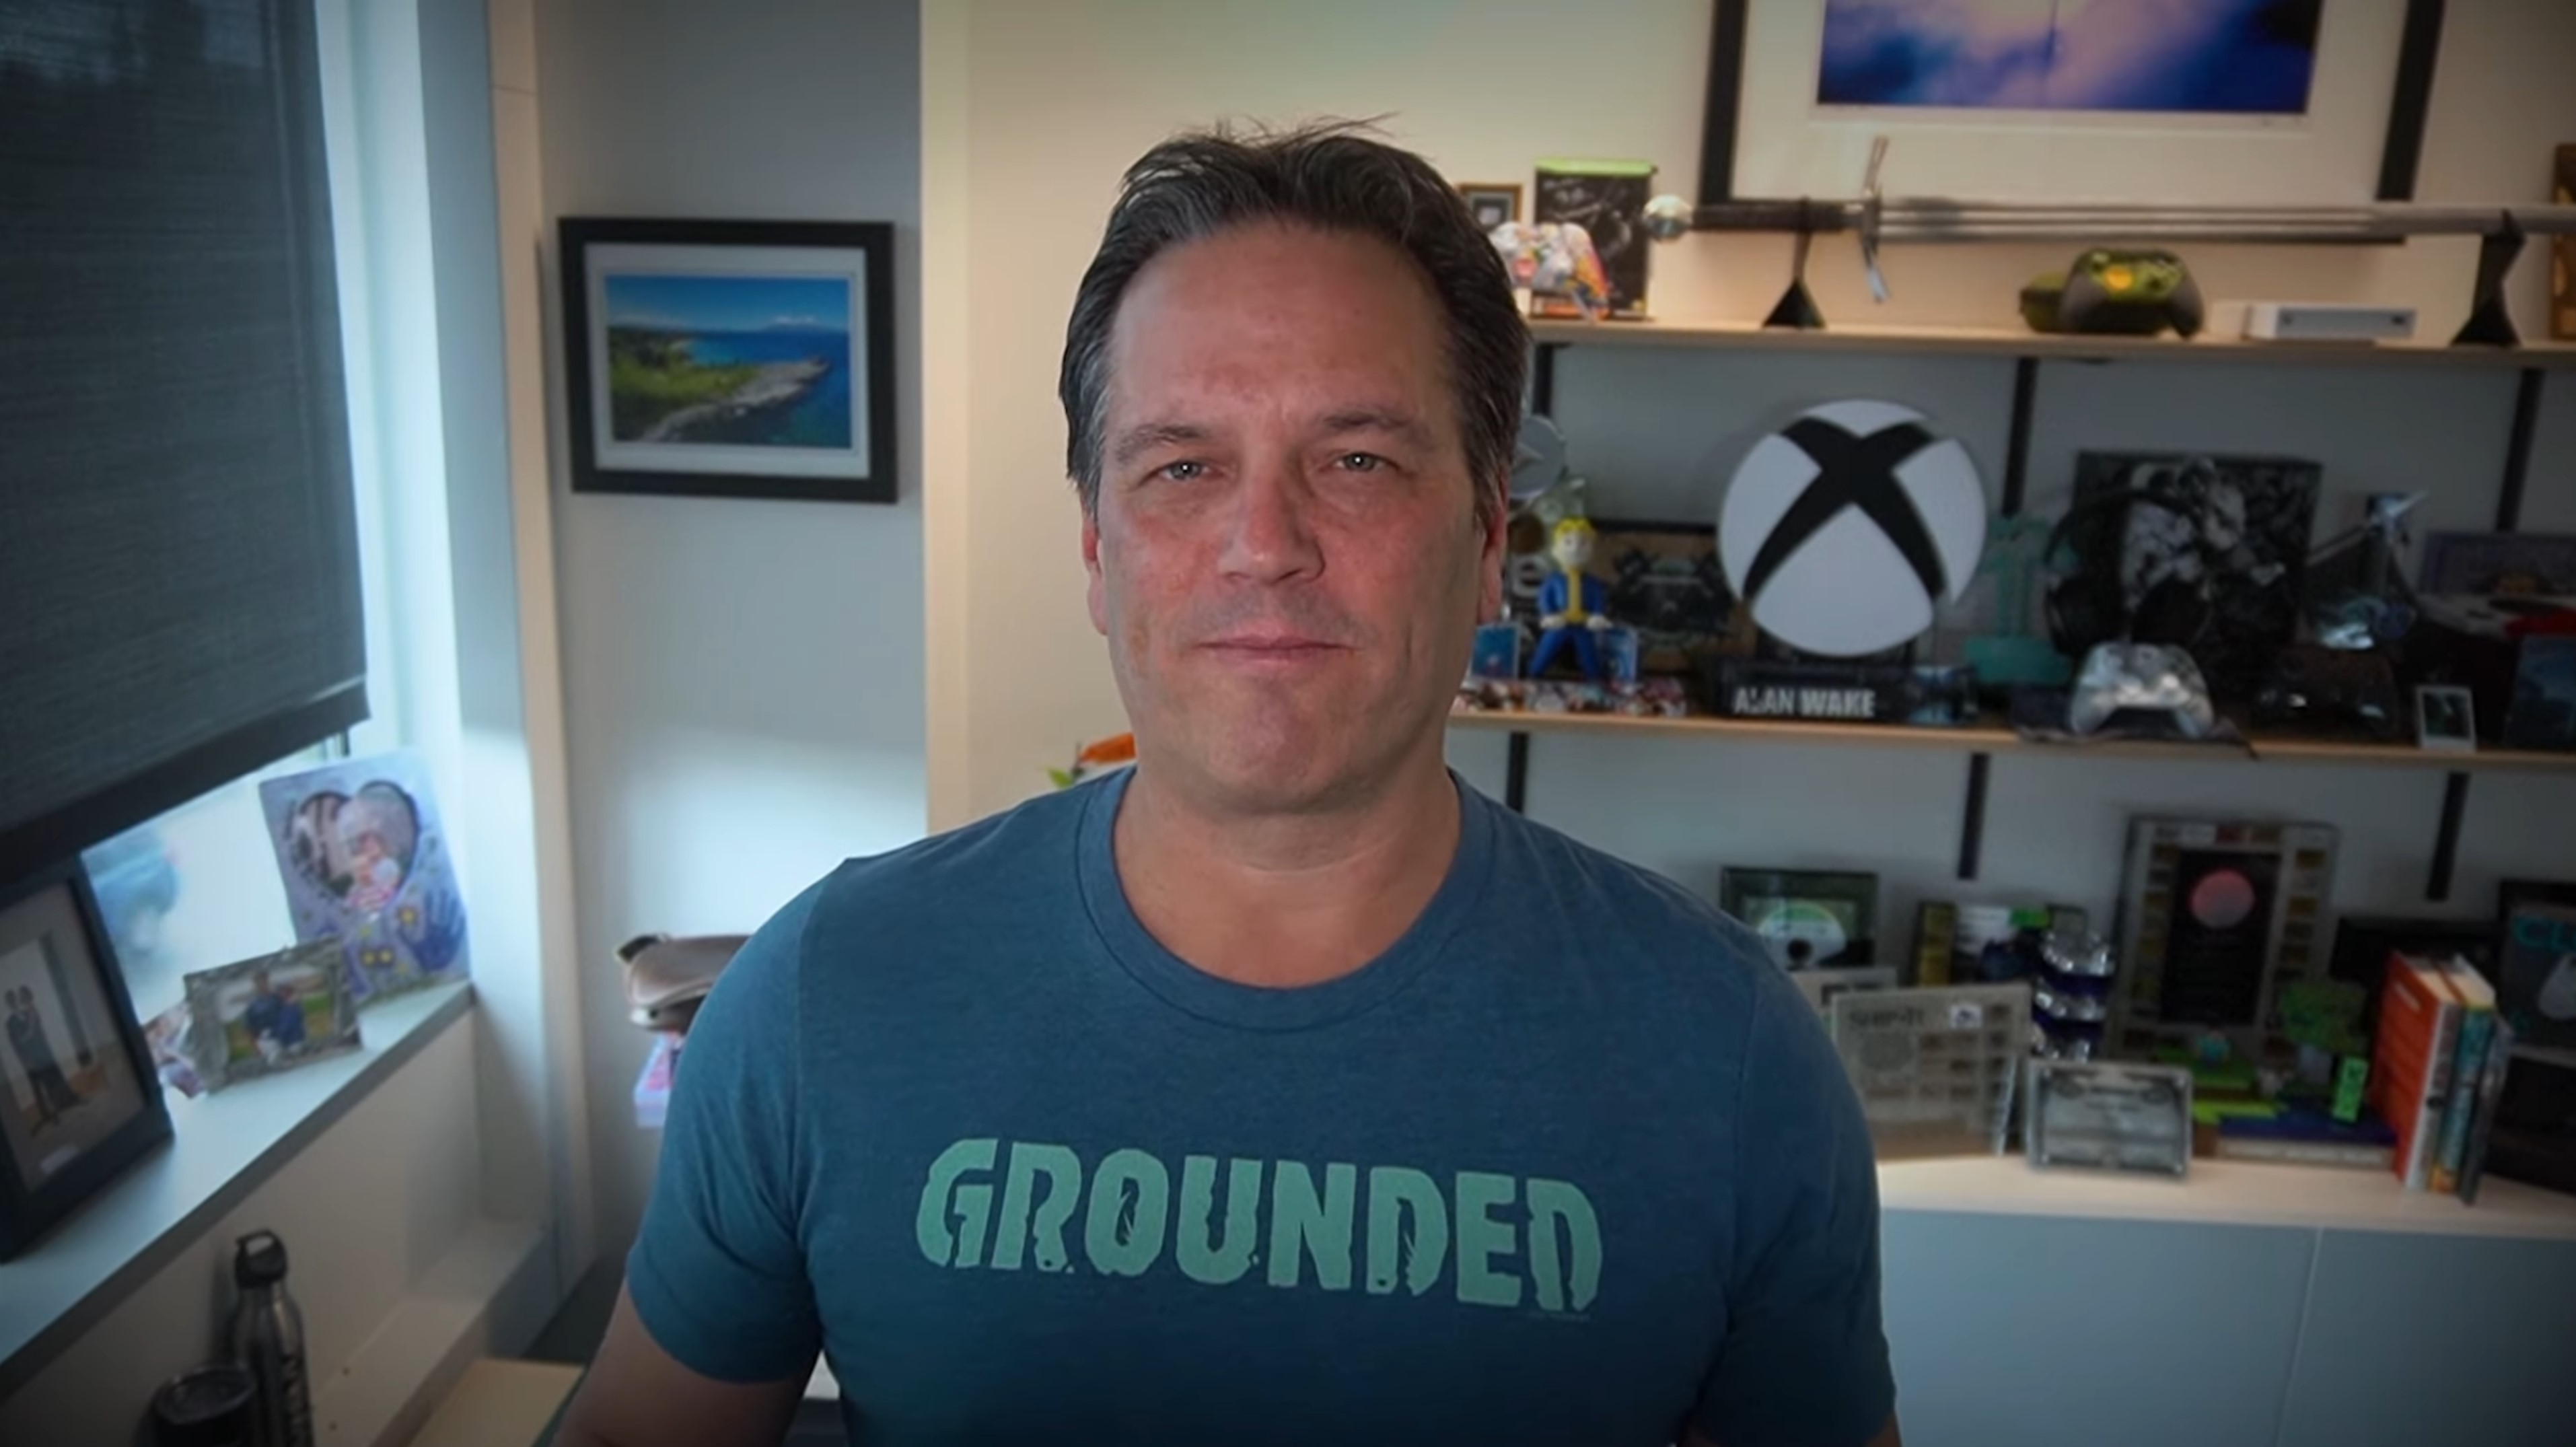 Bethesda Is Showing Its Strength in Microsoft's Portfolio and That's Really  Encouraging, Says Phil Spencer